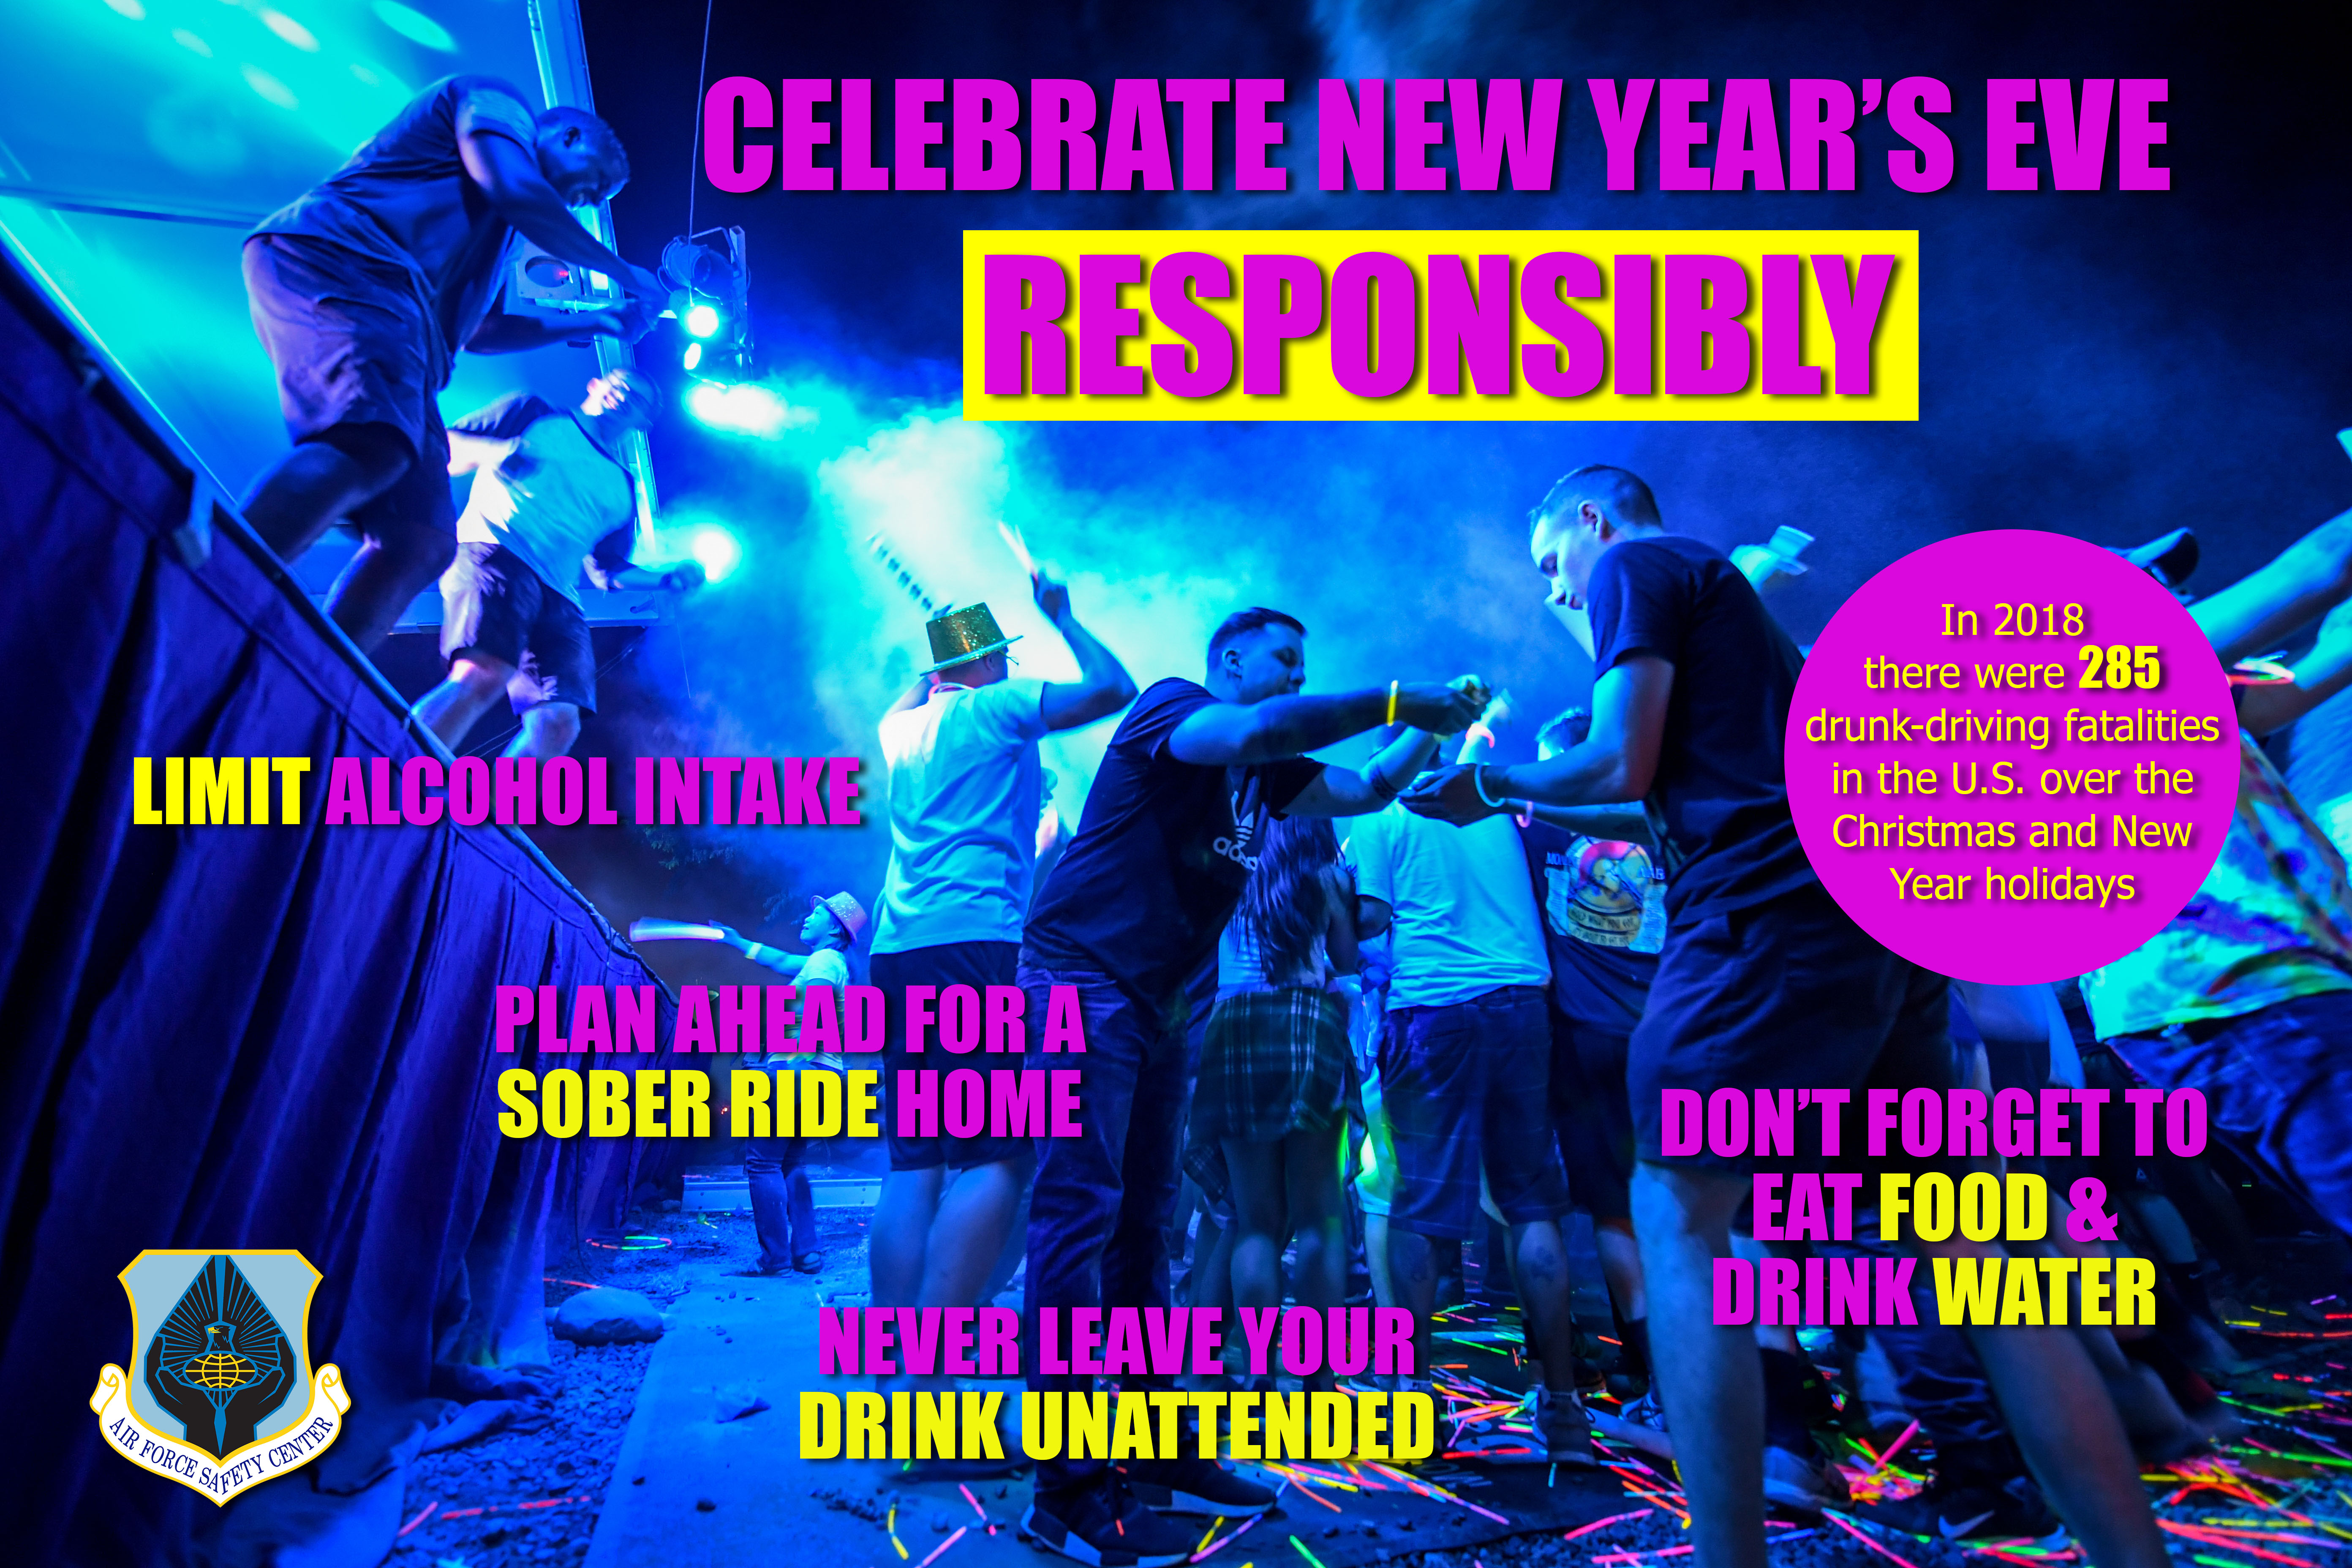 Celebrate New Year's Eve Responsibly poster